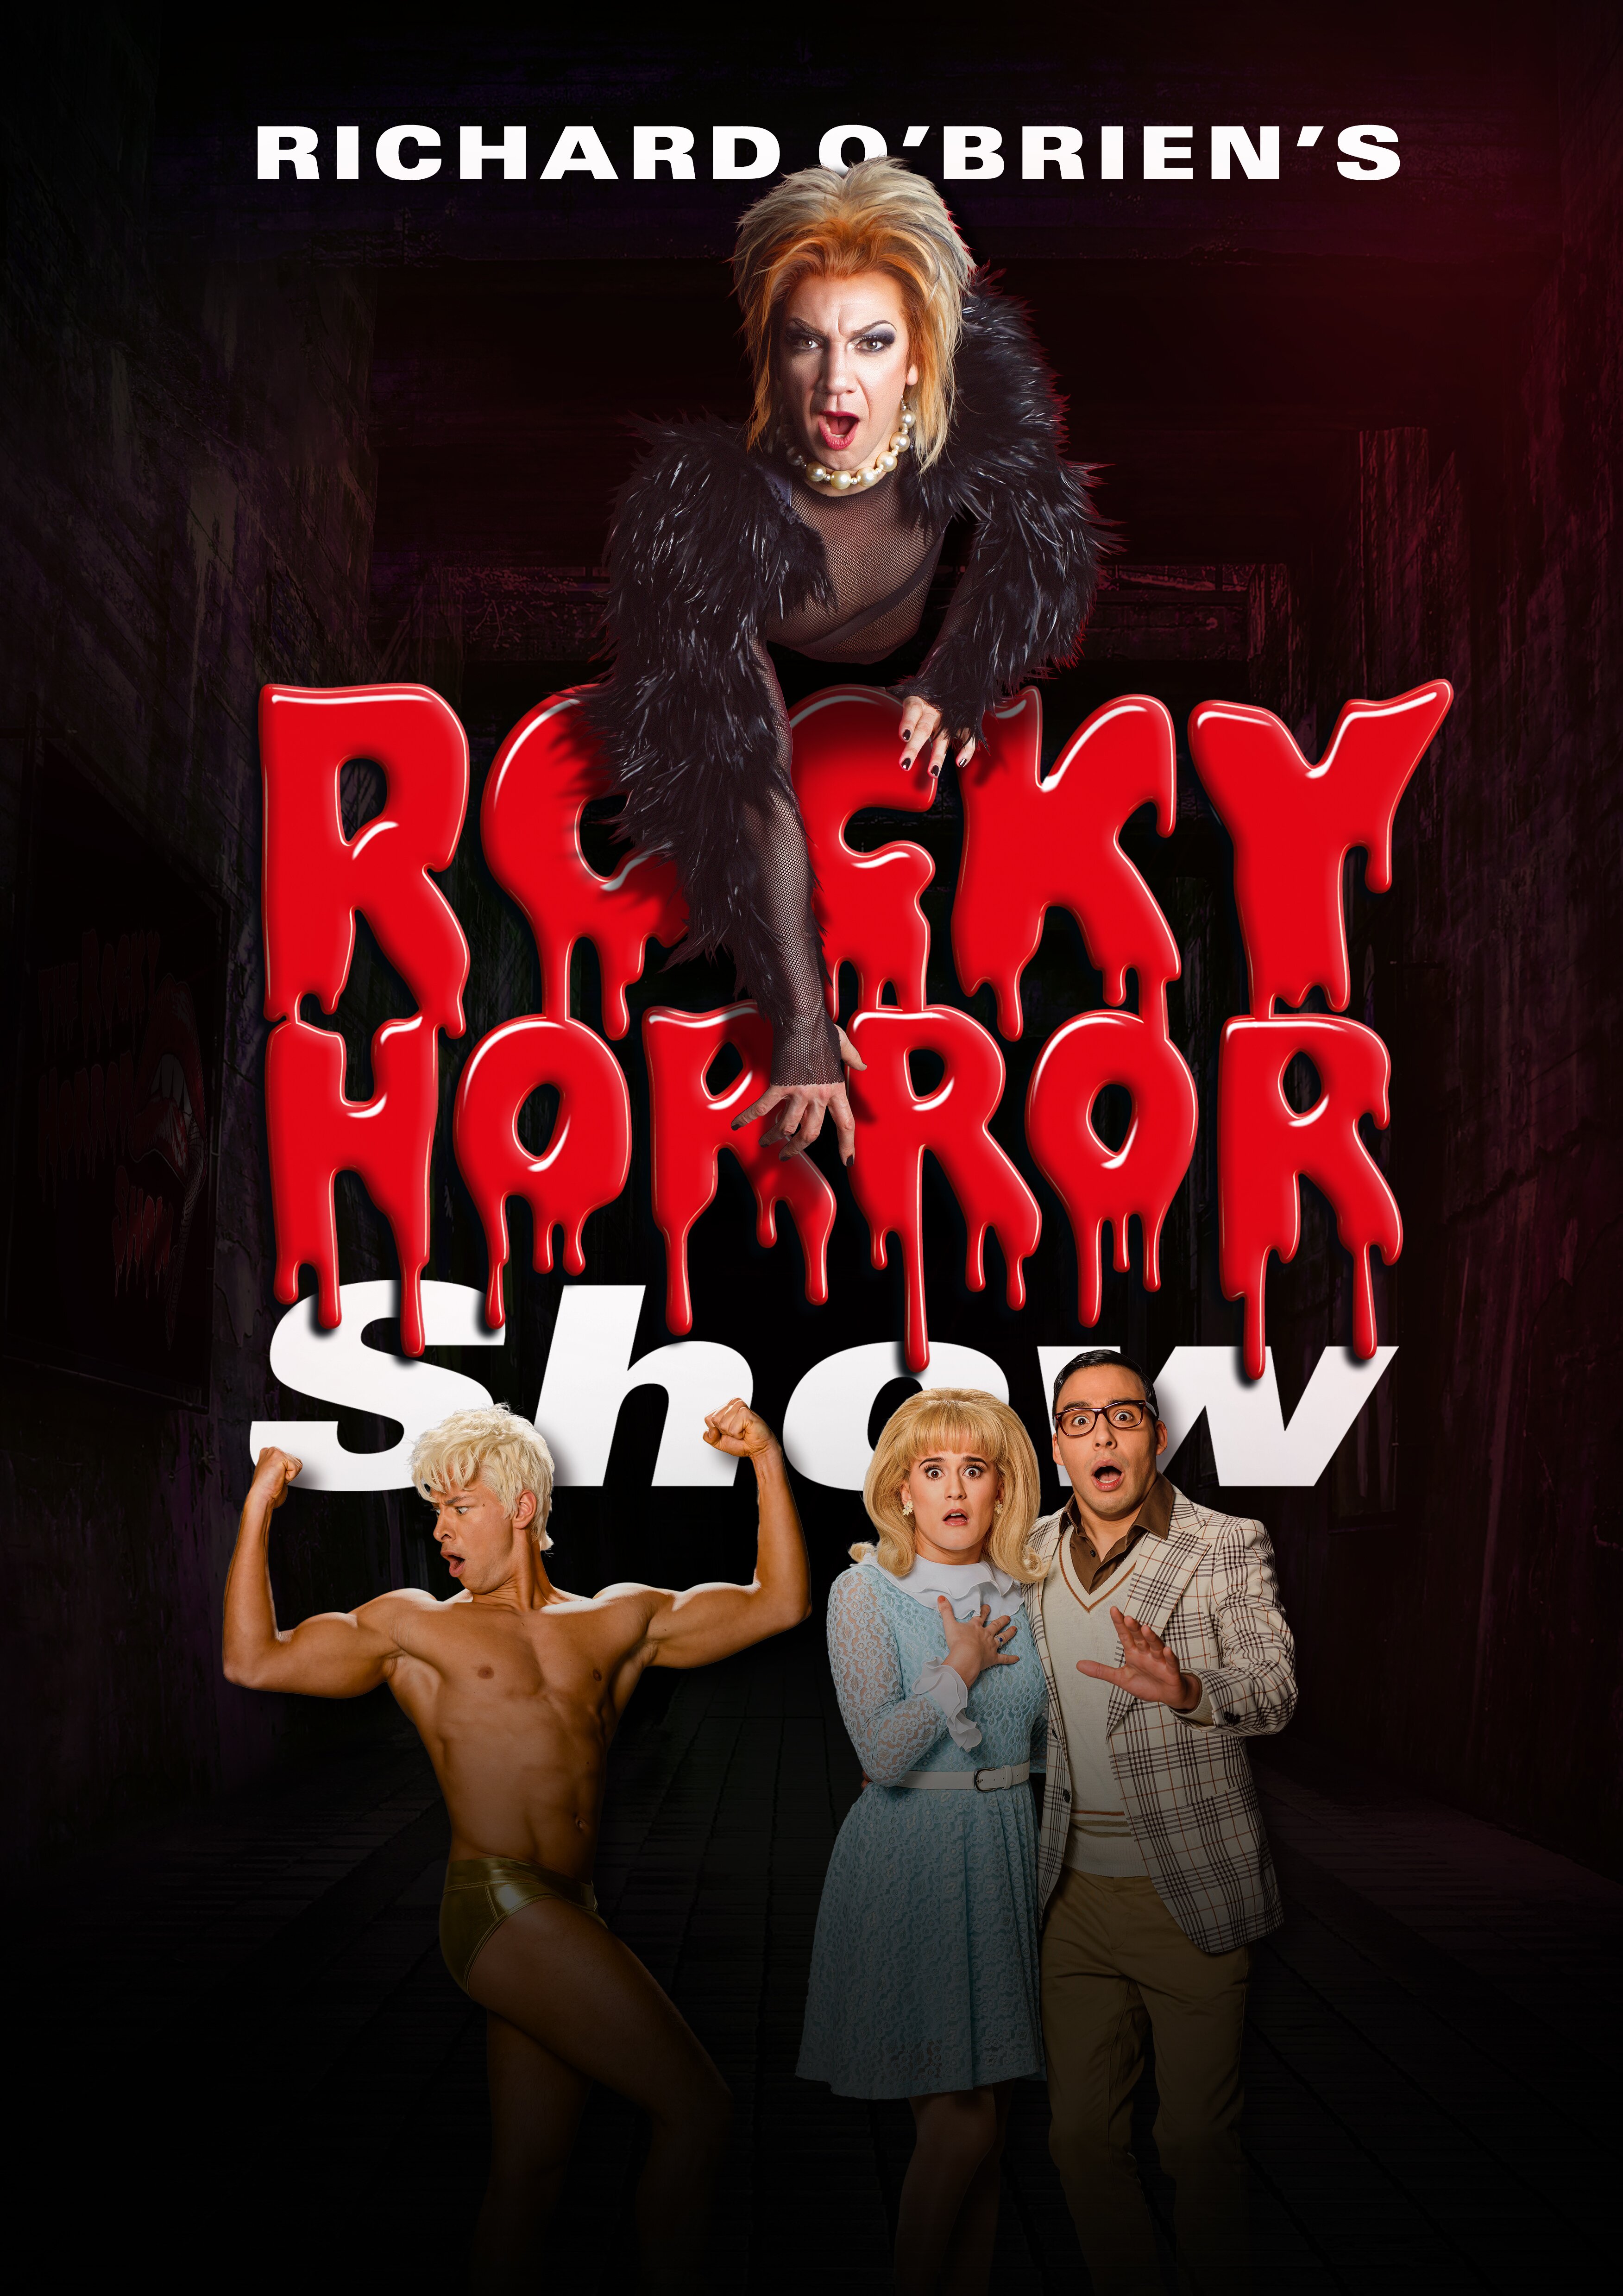 Ticket sales open for ROCKY HORROR SHOW